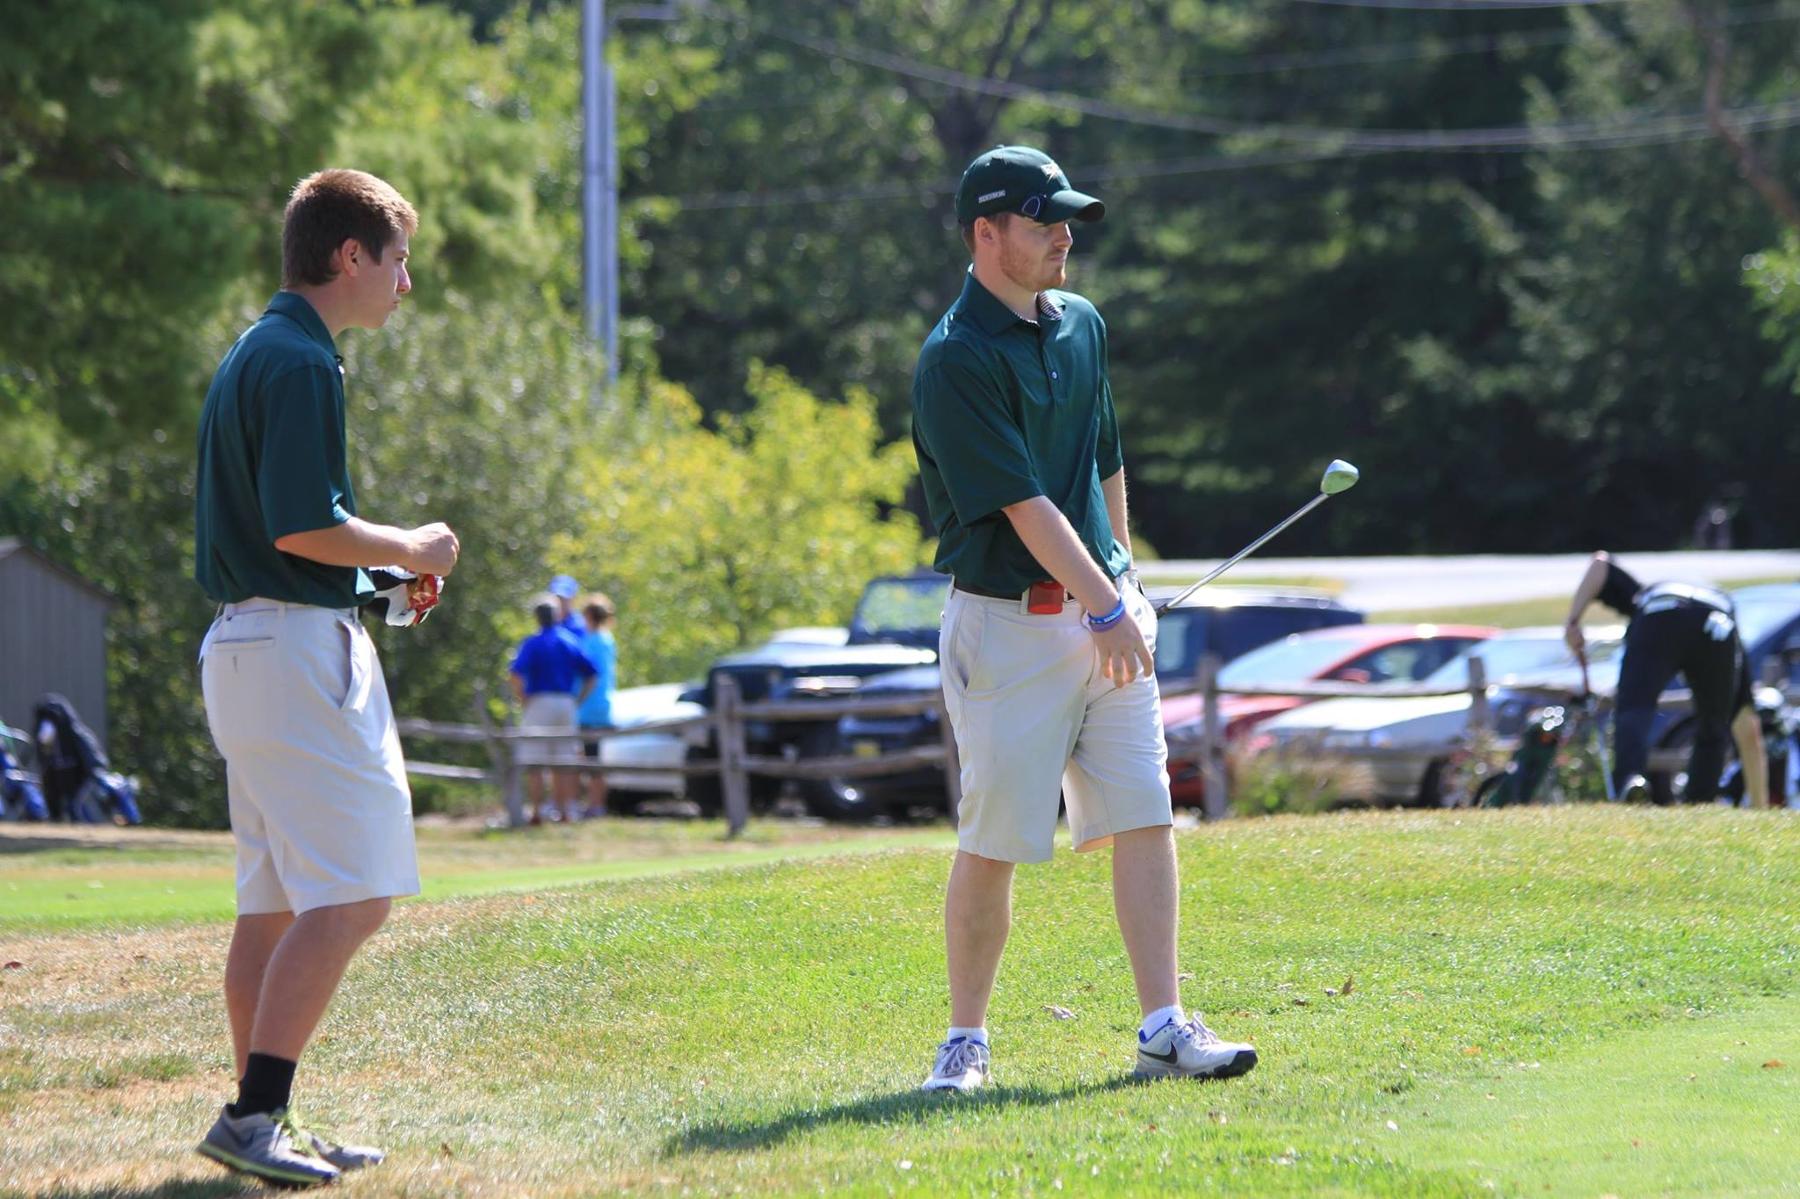 Men's Golf 16th After 18 Holes At Williams Invitational